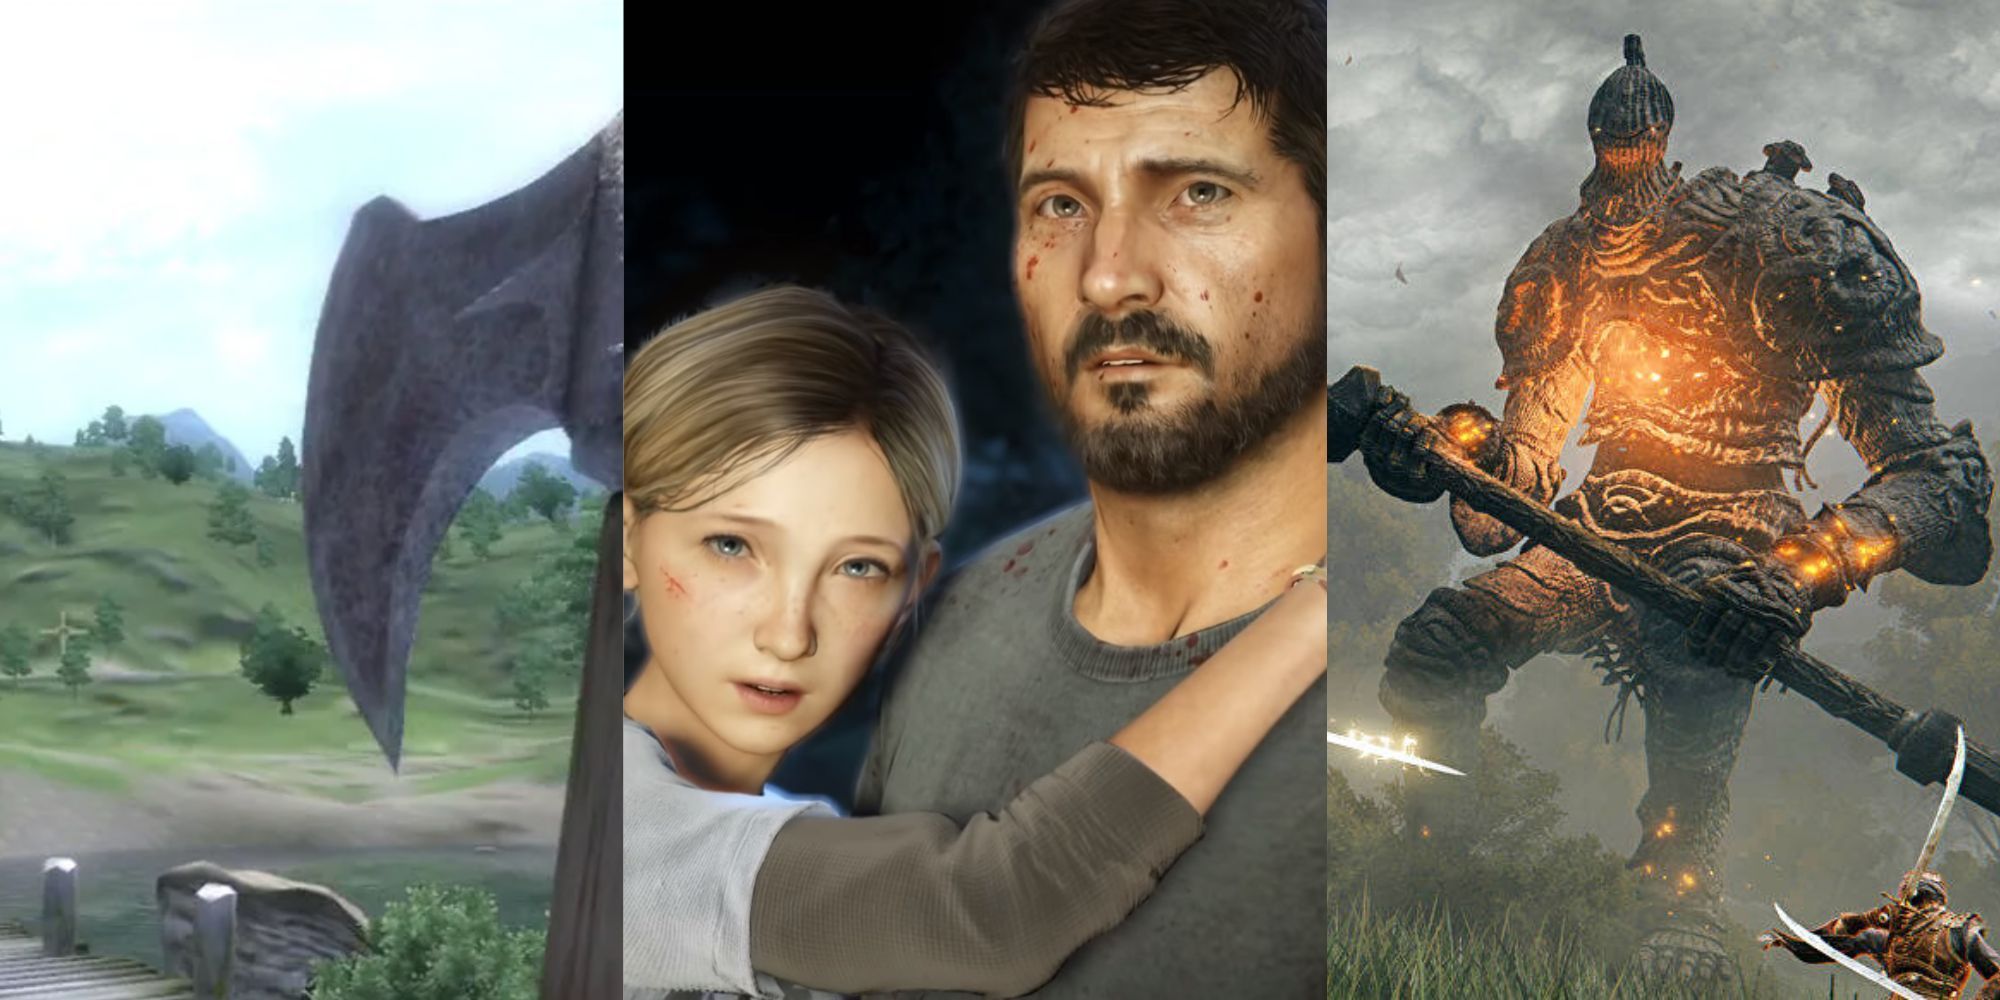 Three images - axe, Joel and Sarah from The Last of Us and Elden Ring fight